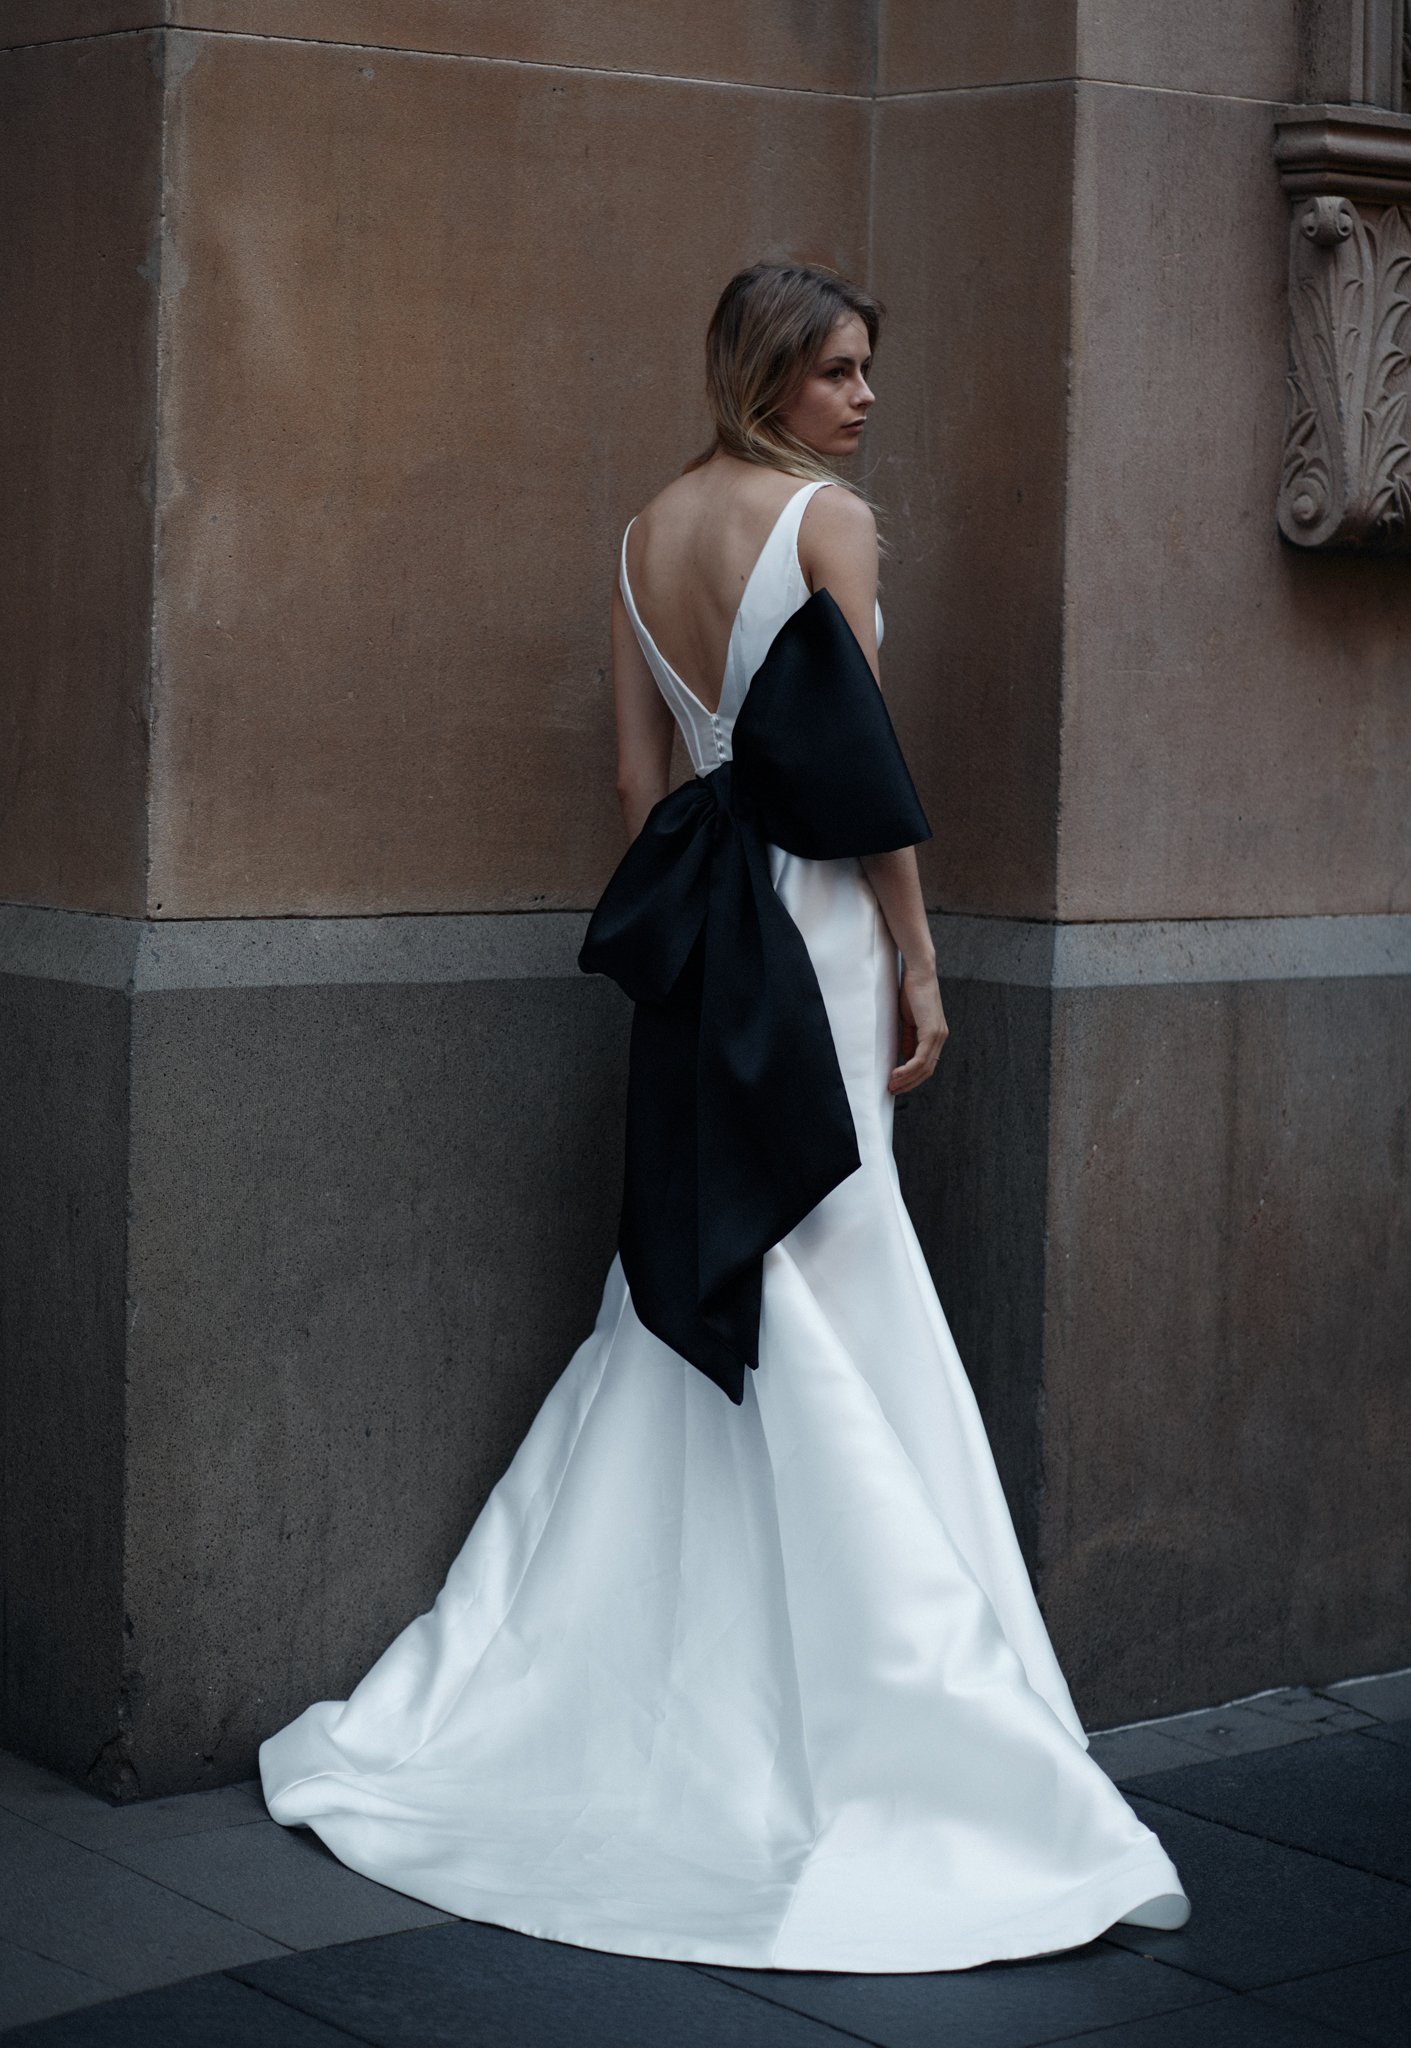 Low back wedding dress with bow from Moira Hughes Couture Sydney.jpg